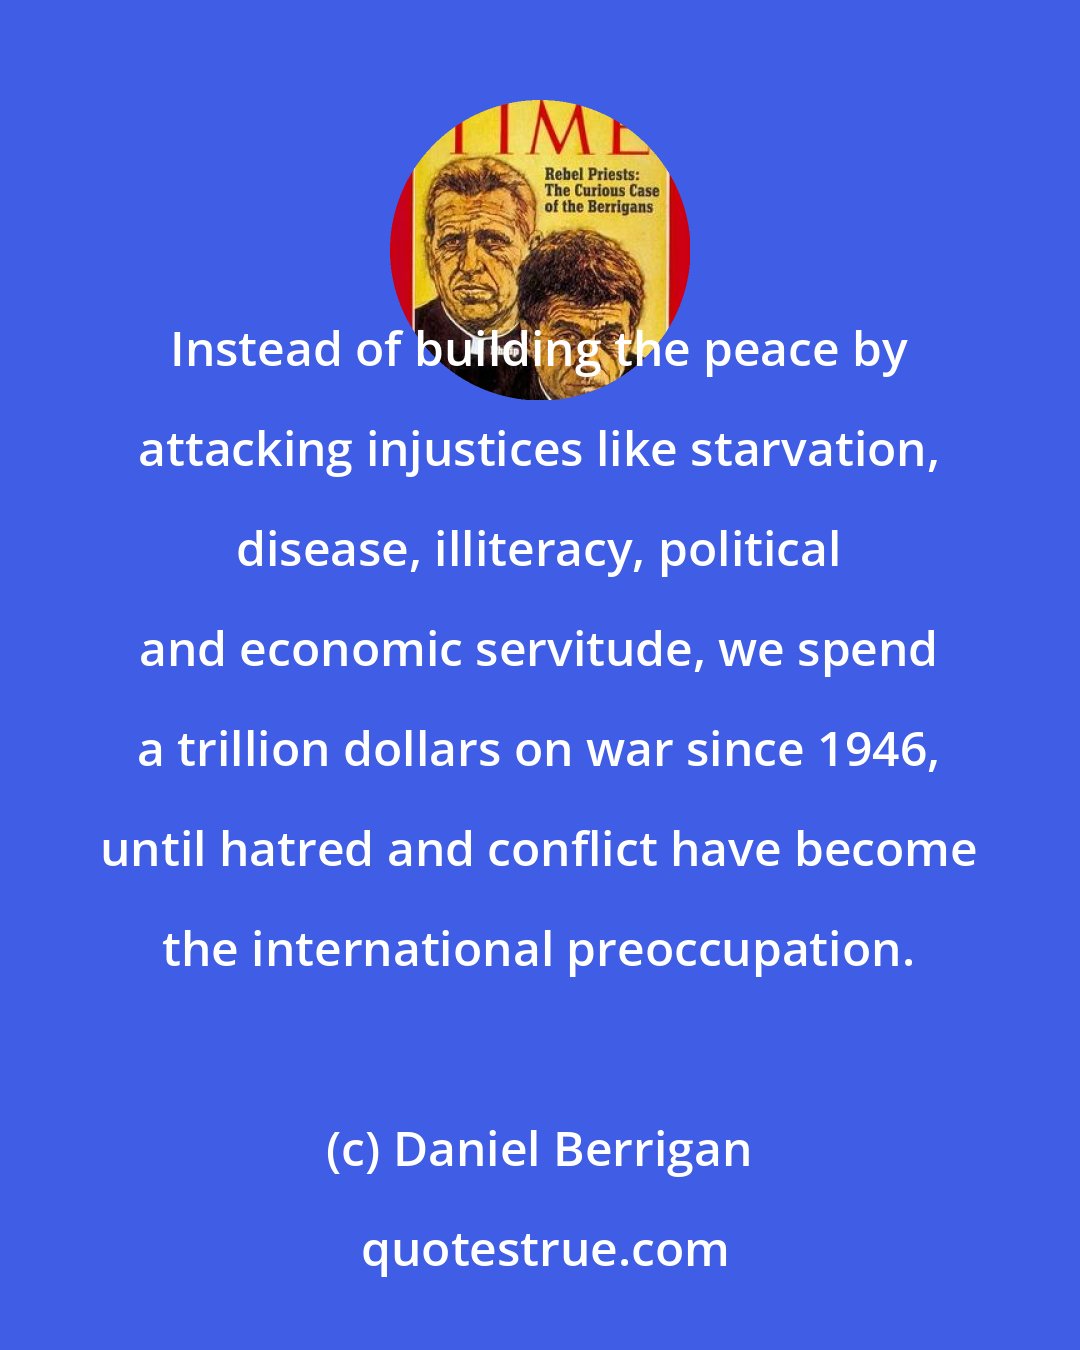 Daniel Berrigan: Instead of building the peace by attacking injustices like starvation, disease, illiteracy, political and economic servitude, we spend a trillion dollars on war since 1946, until hatred and conflict have become the international preoccupation.